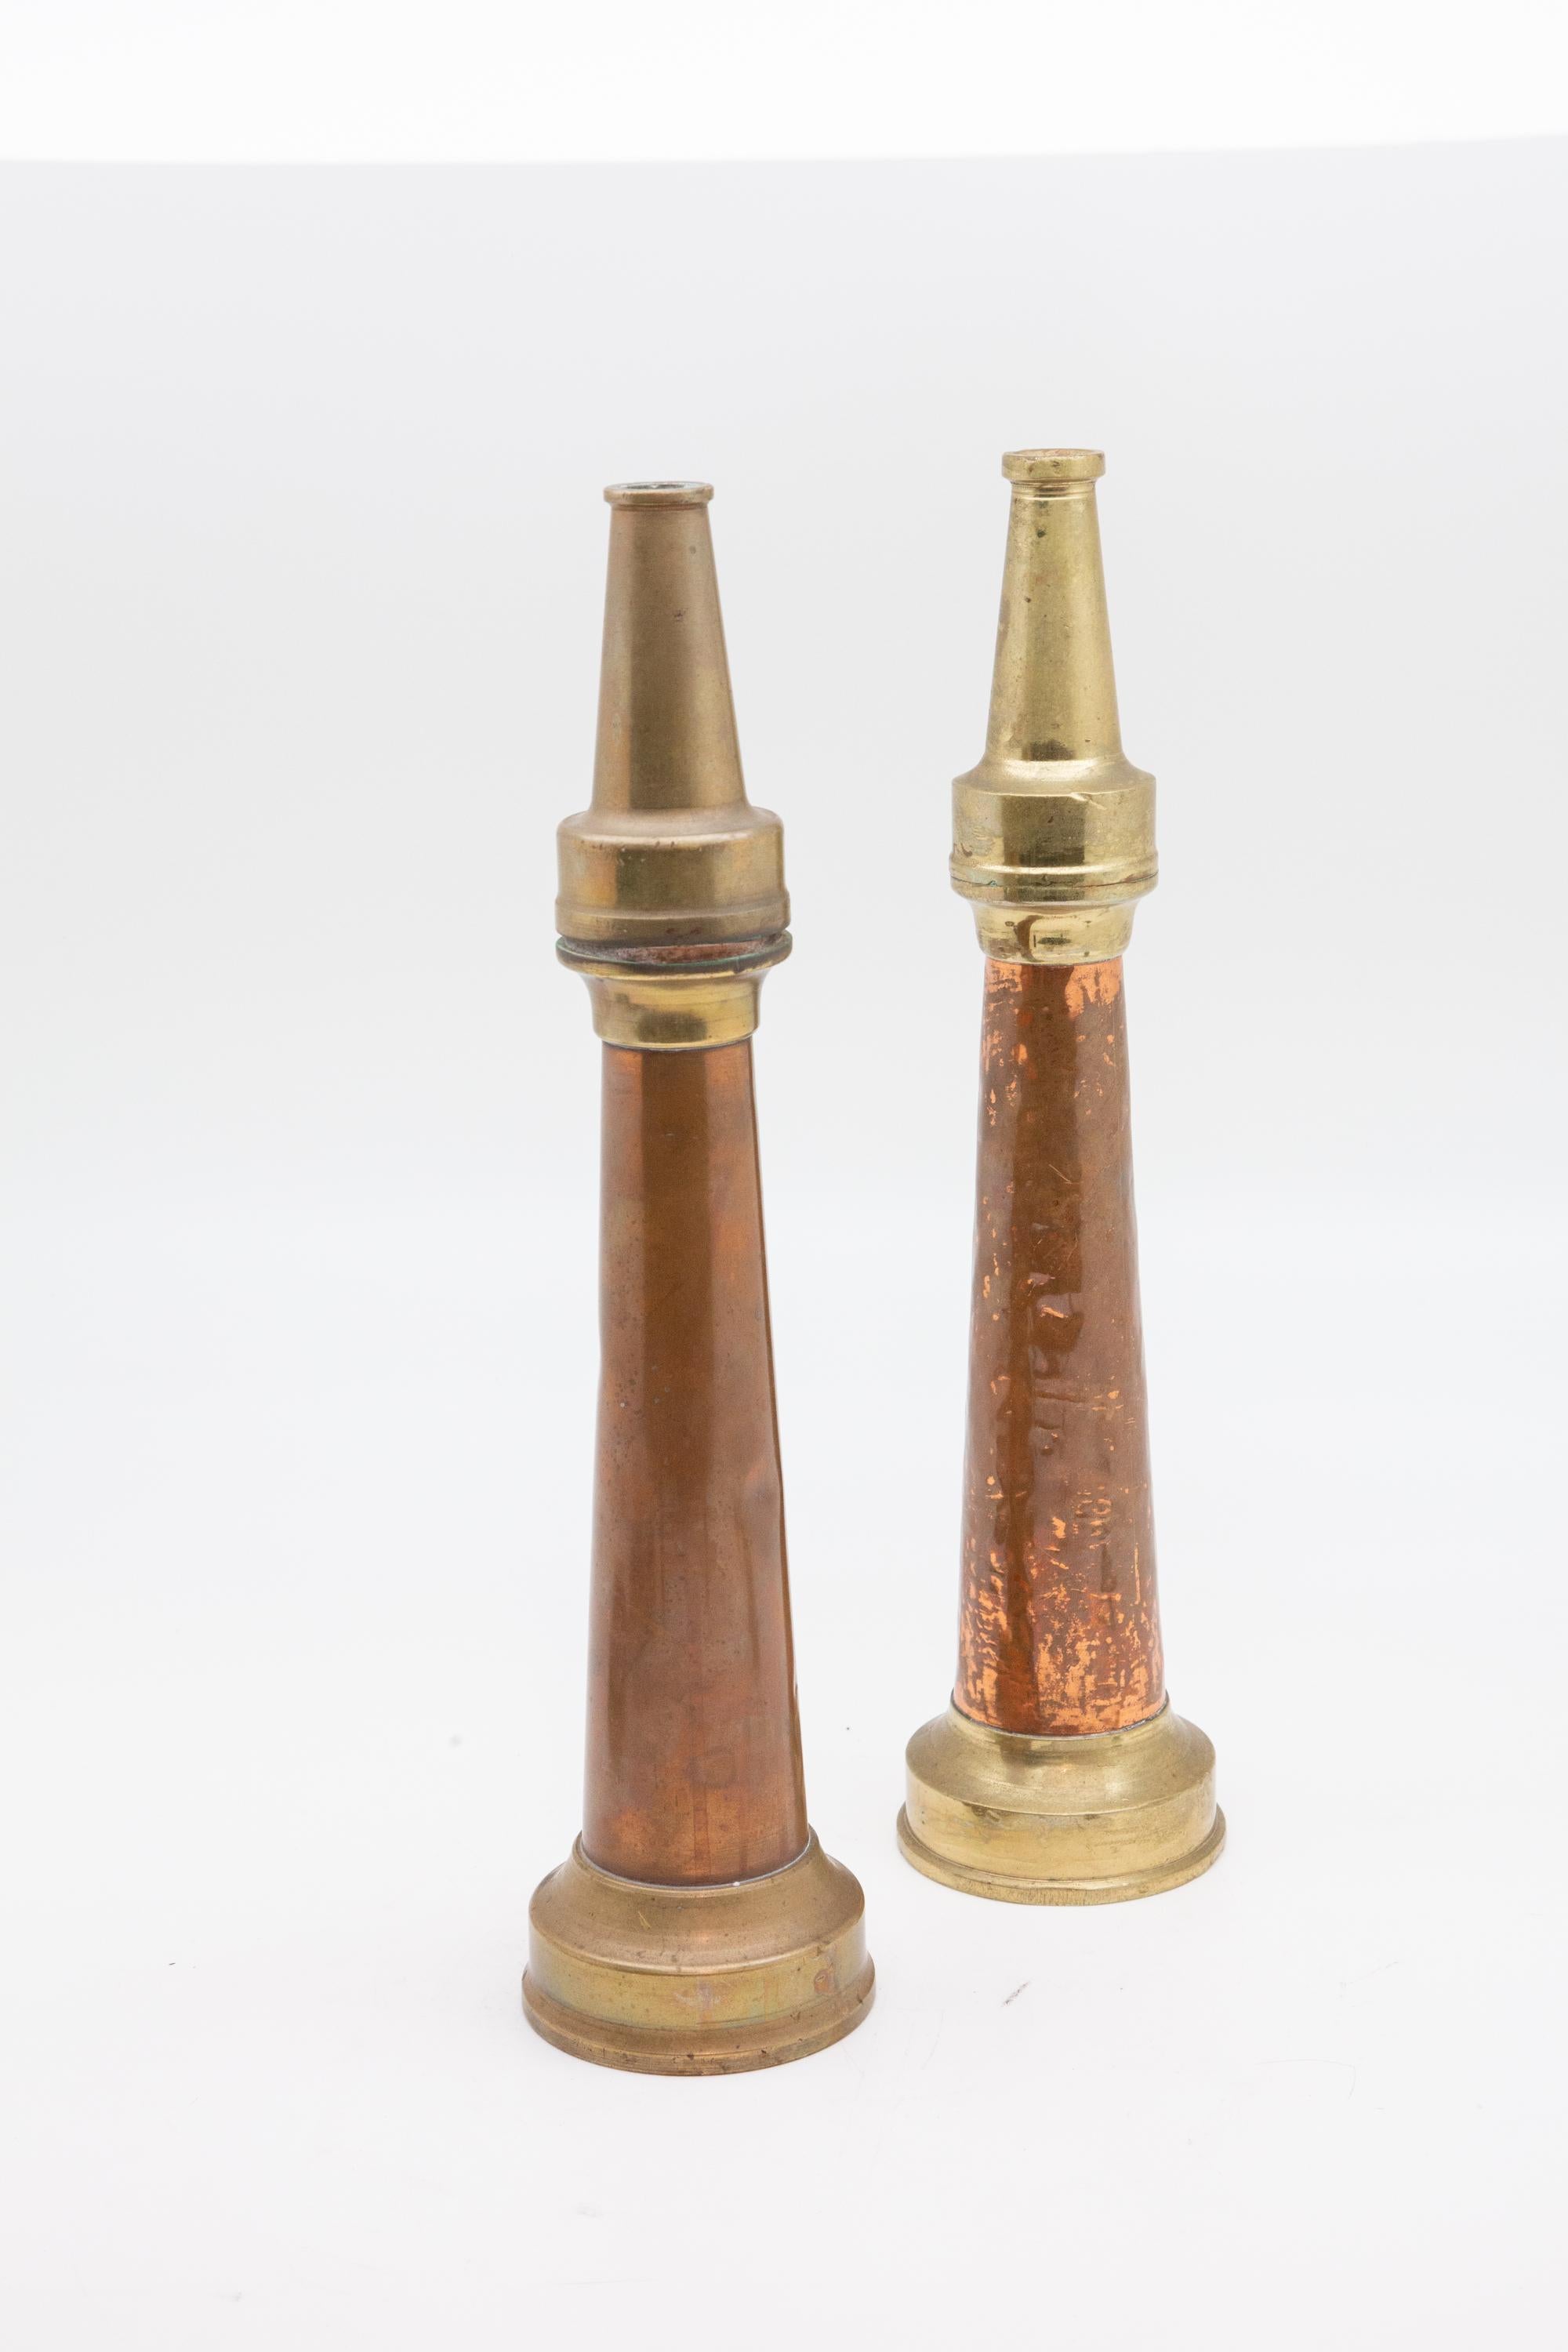 Pair of brass and copper vintage fire hose nozzles. Measures: 16